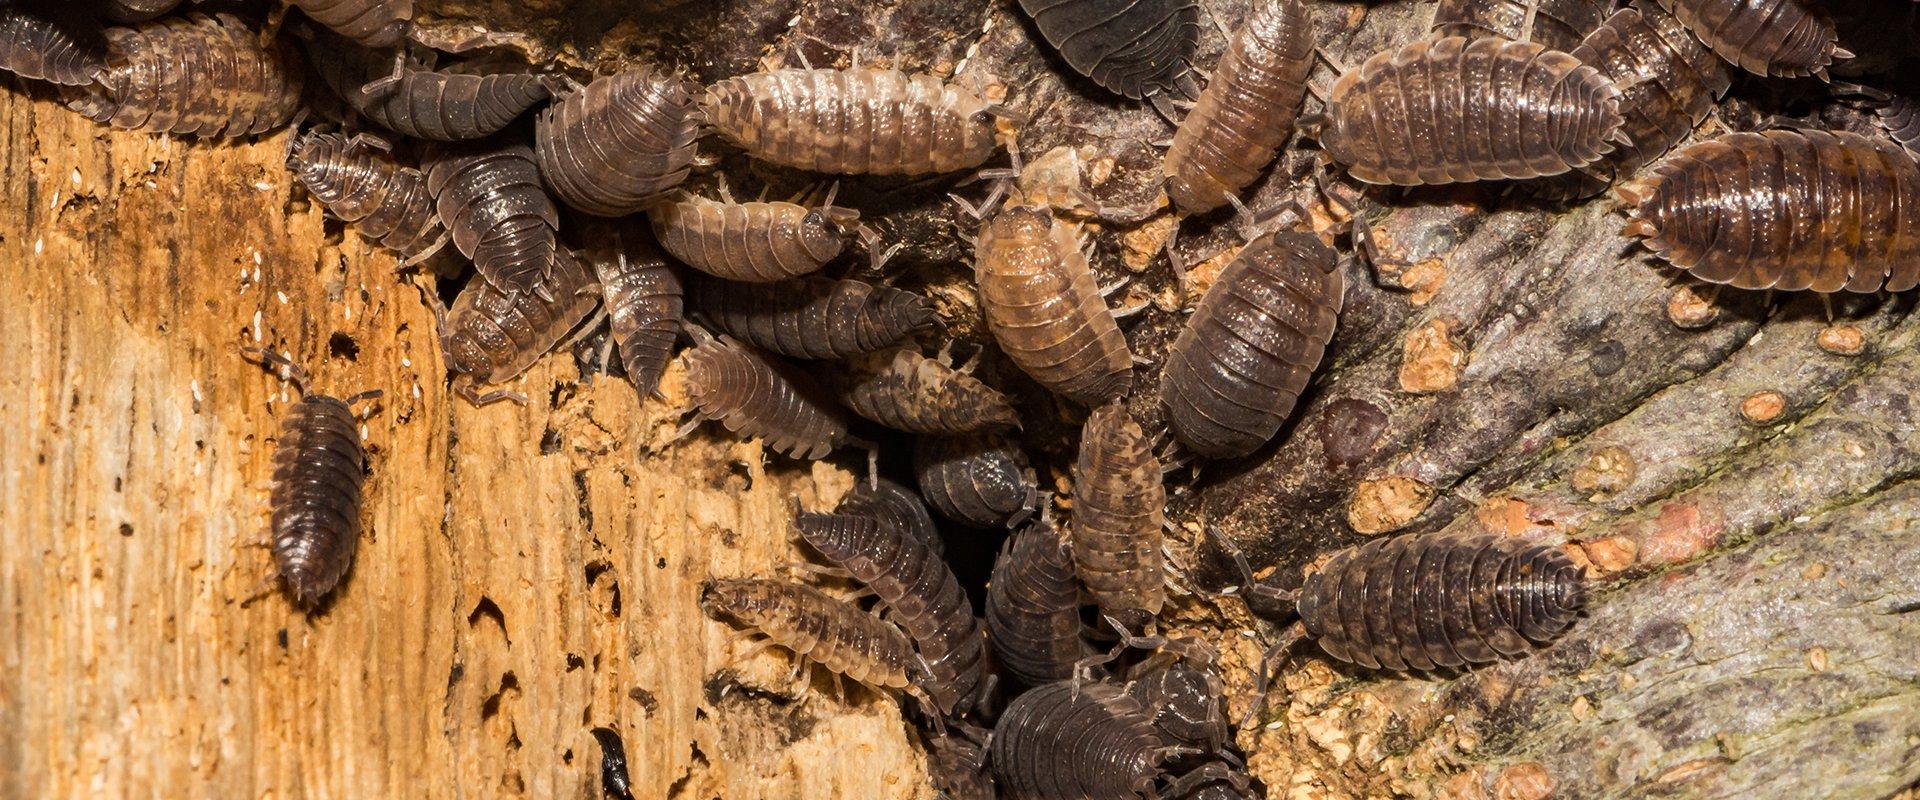 dozens of pill bugs outside of a home in washington dc